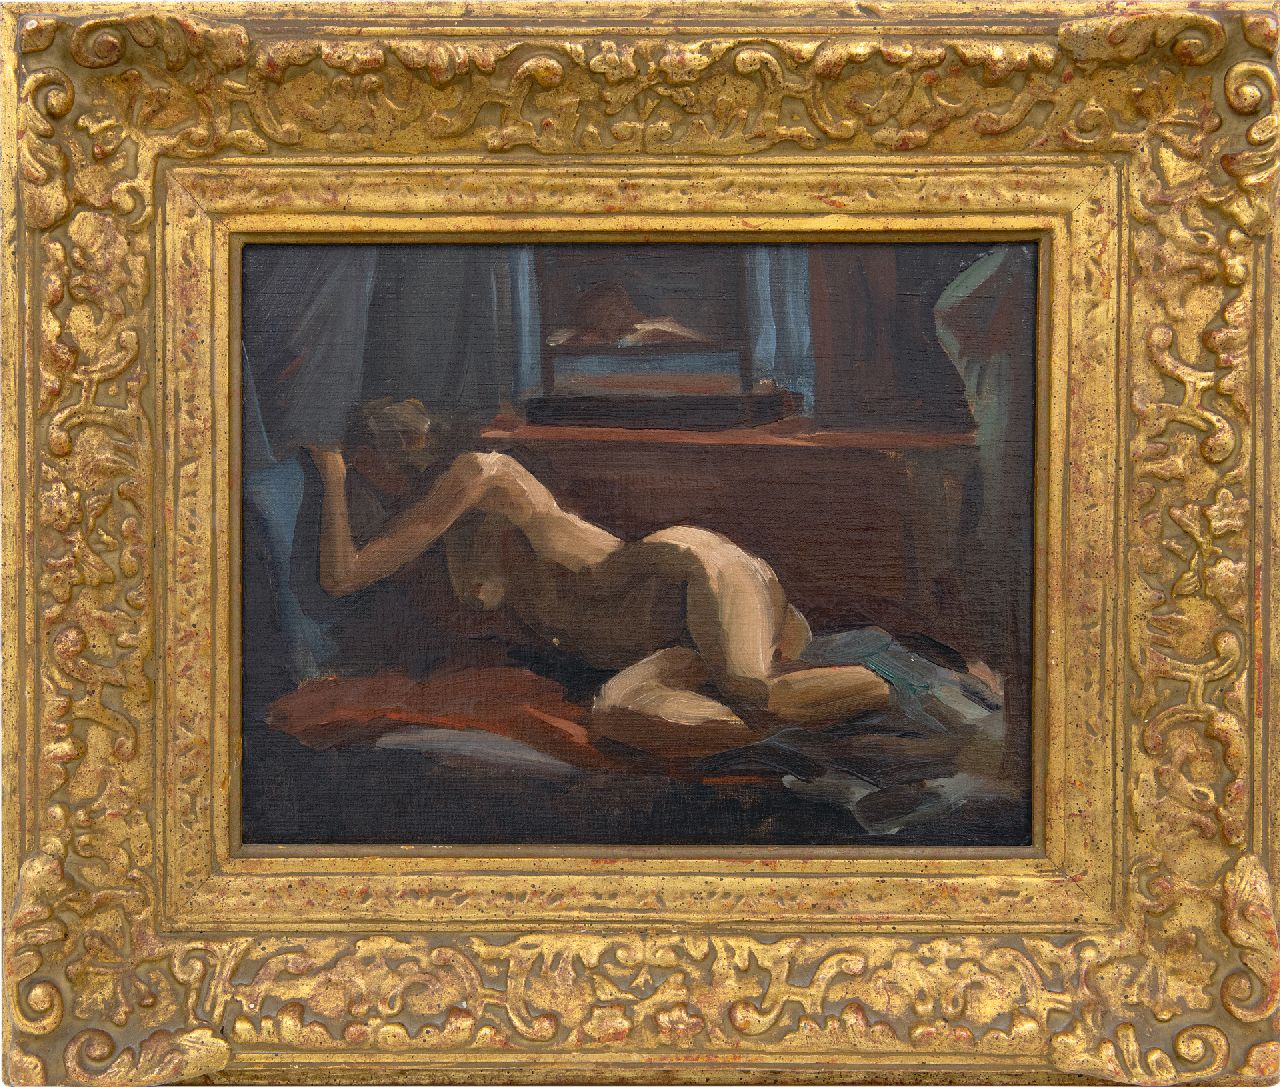 Maze P.L.  | 'Paul' Lucien Maze | Paintings offered for sale | Reclining nude and voyeur, oil on canvas laid down on board 27.0 x 34.8 cm